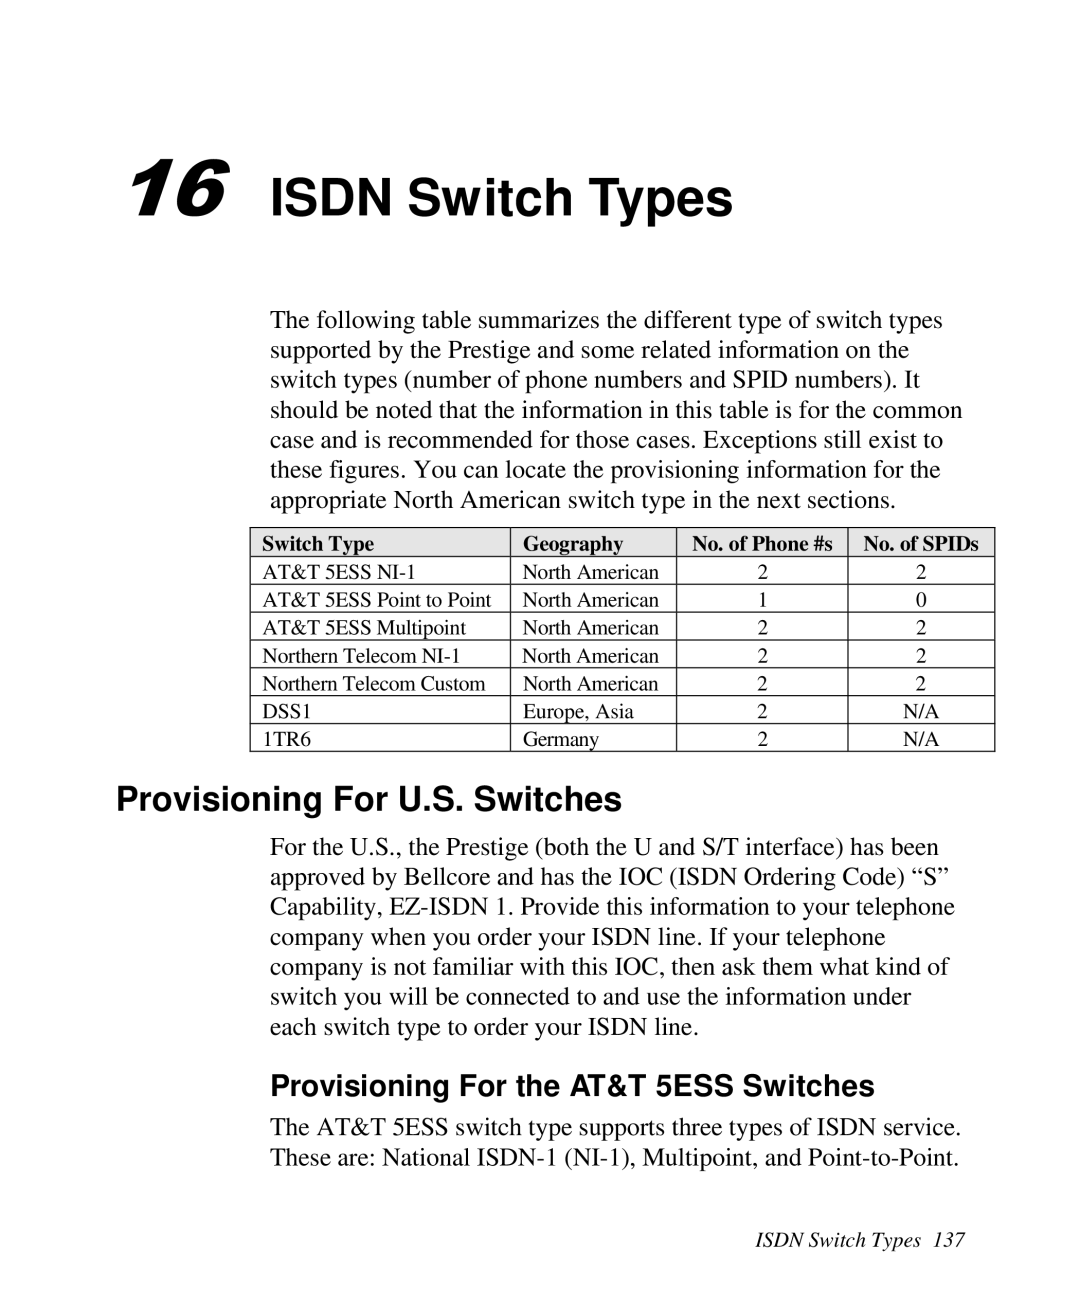 ZyXEL Communications 2864I ISDN Switch Types, Provisioning For U.S. Switches, Provisioning For the AT&T 5ESS Switches 